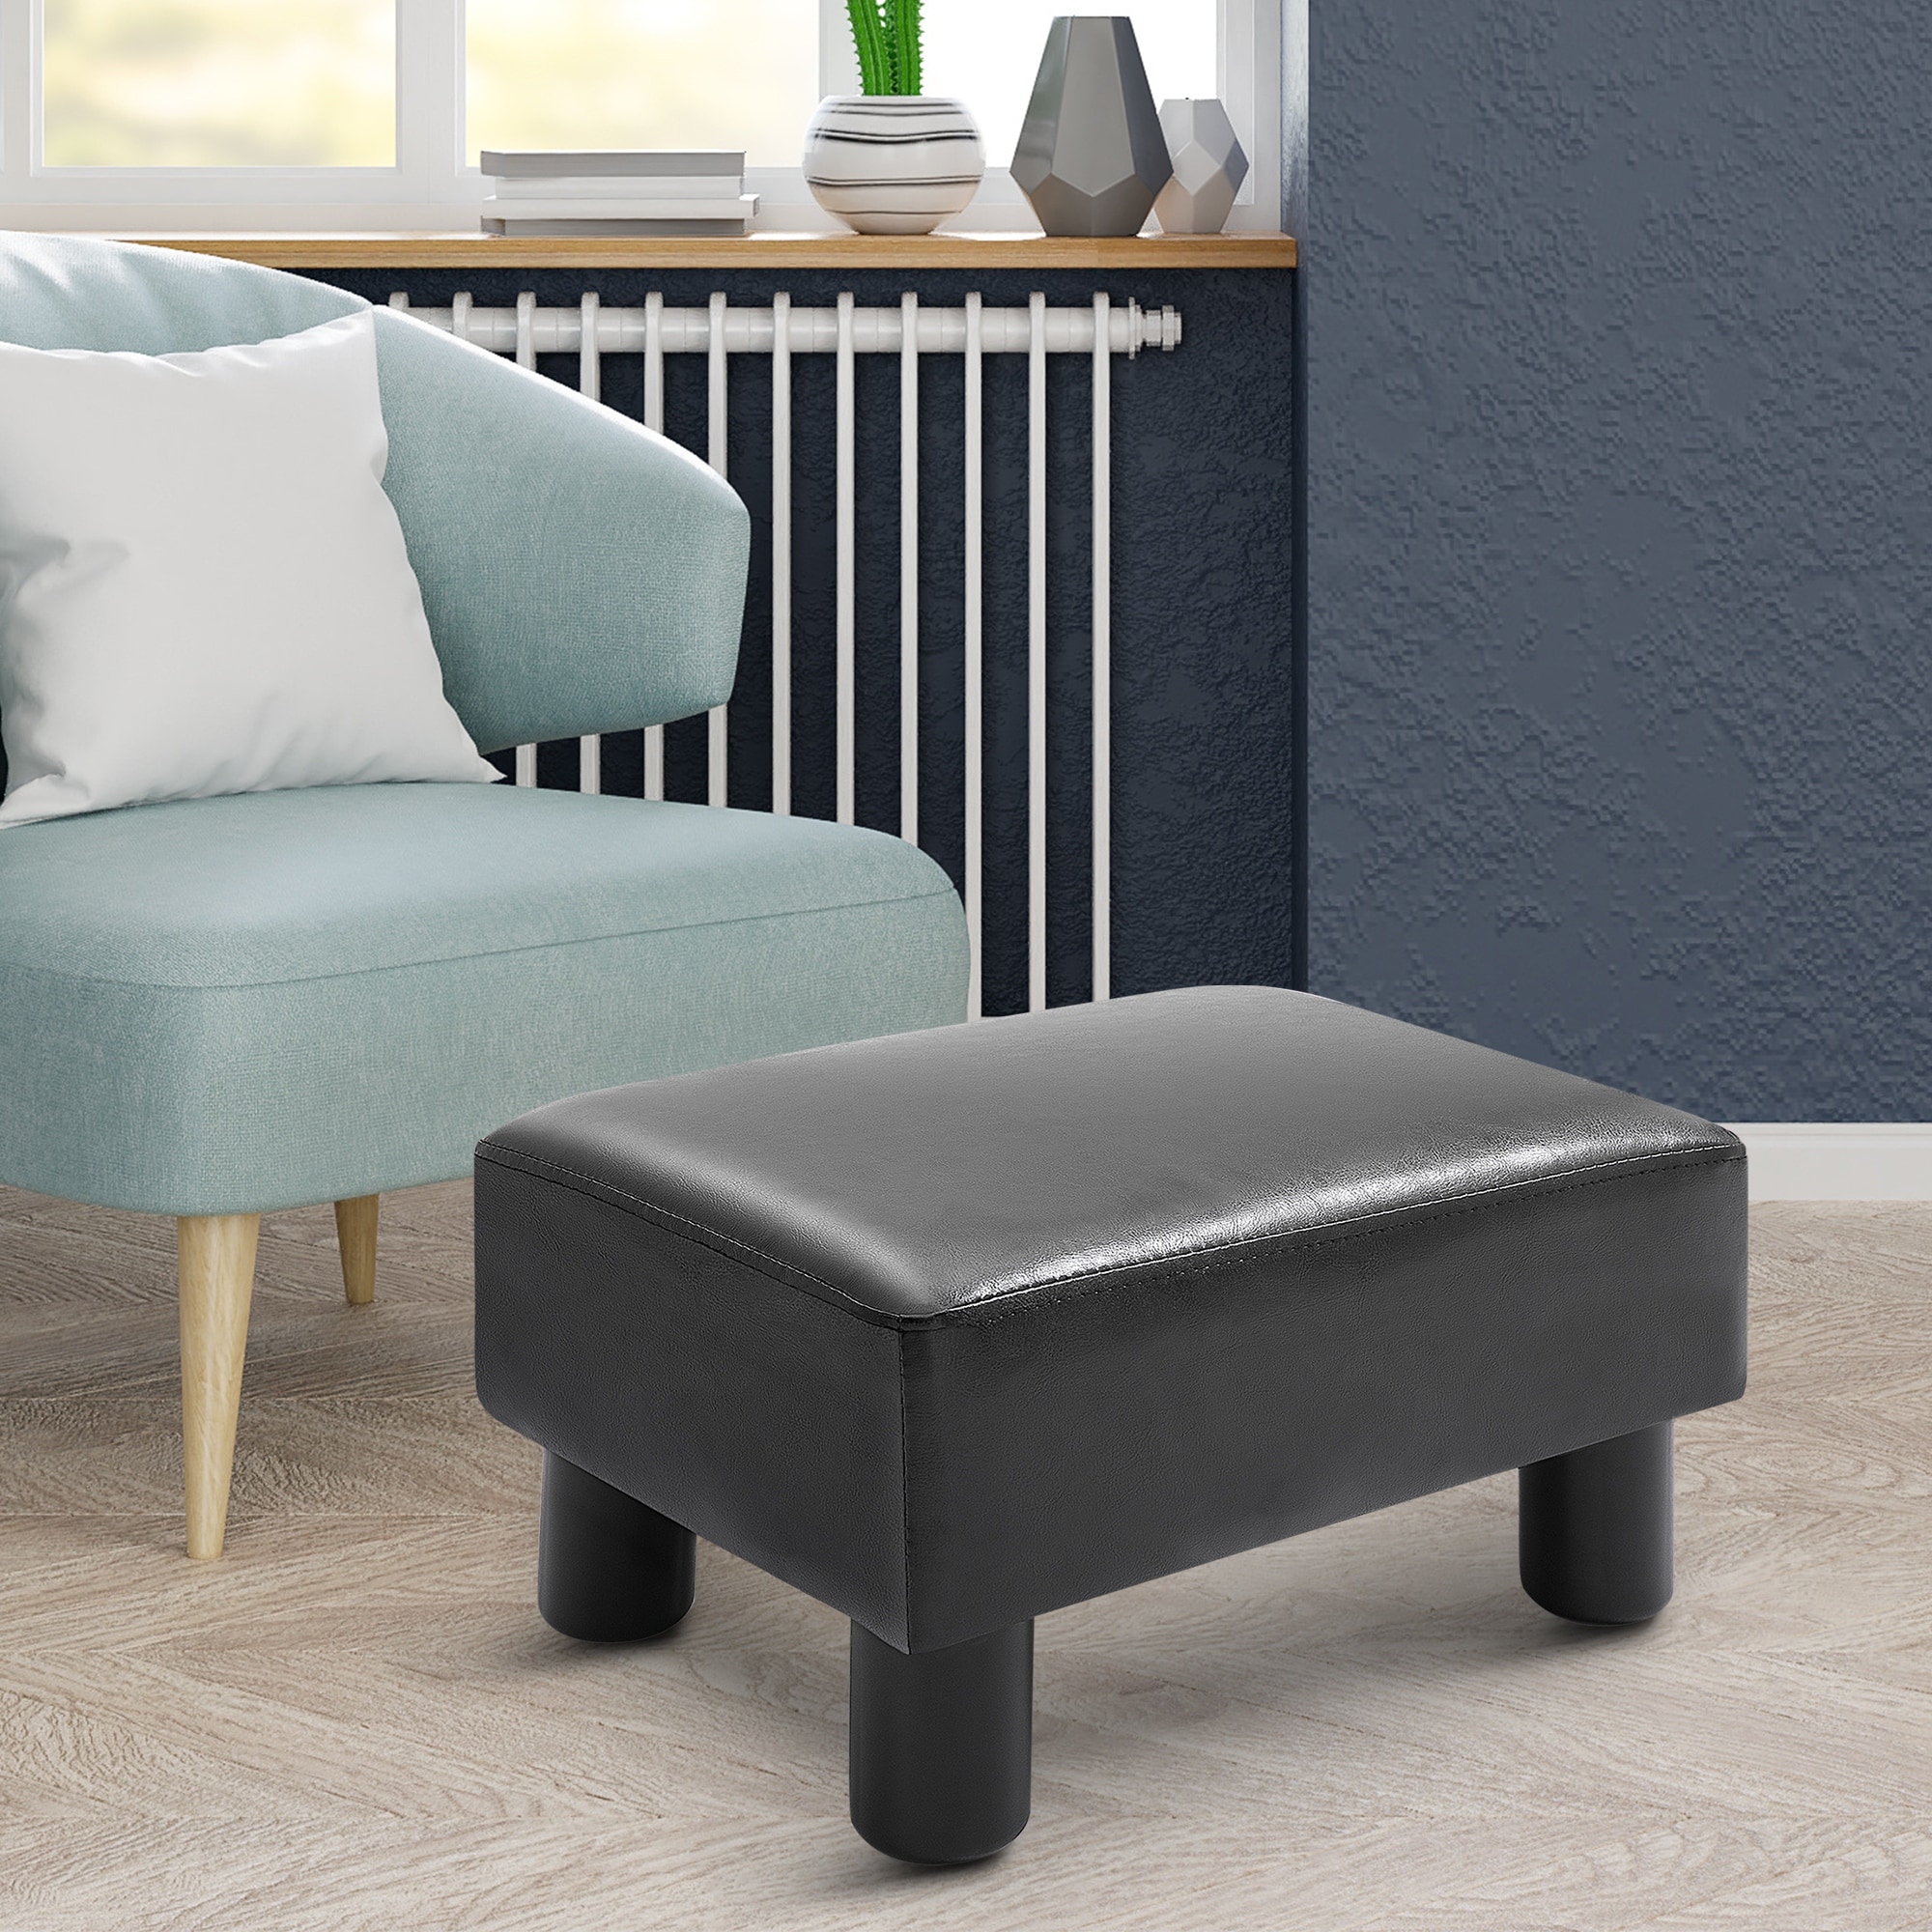 15 Foot Stool Small Accent Foot Rest - Grey